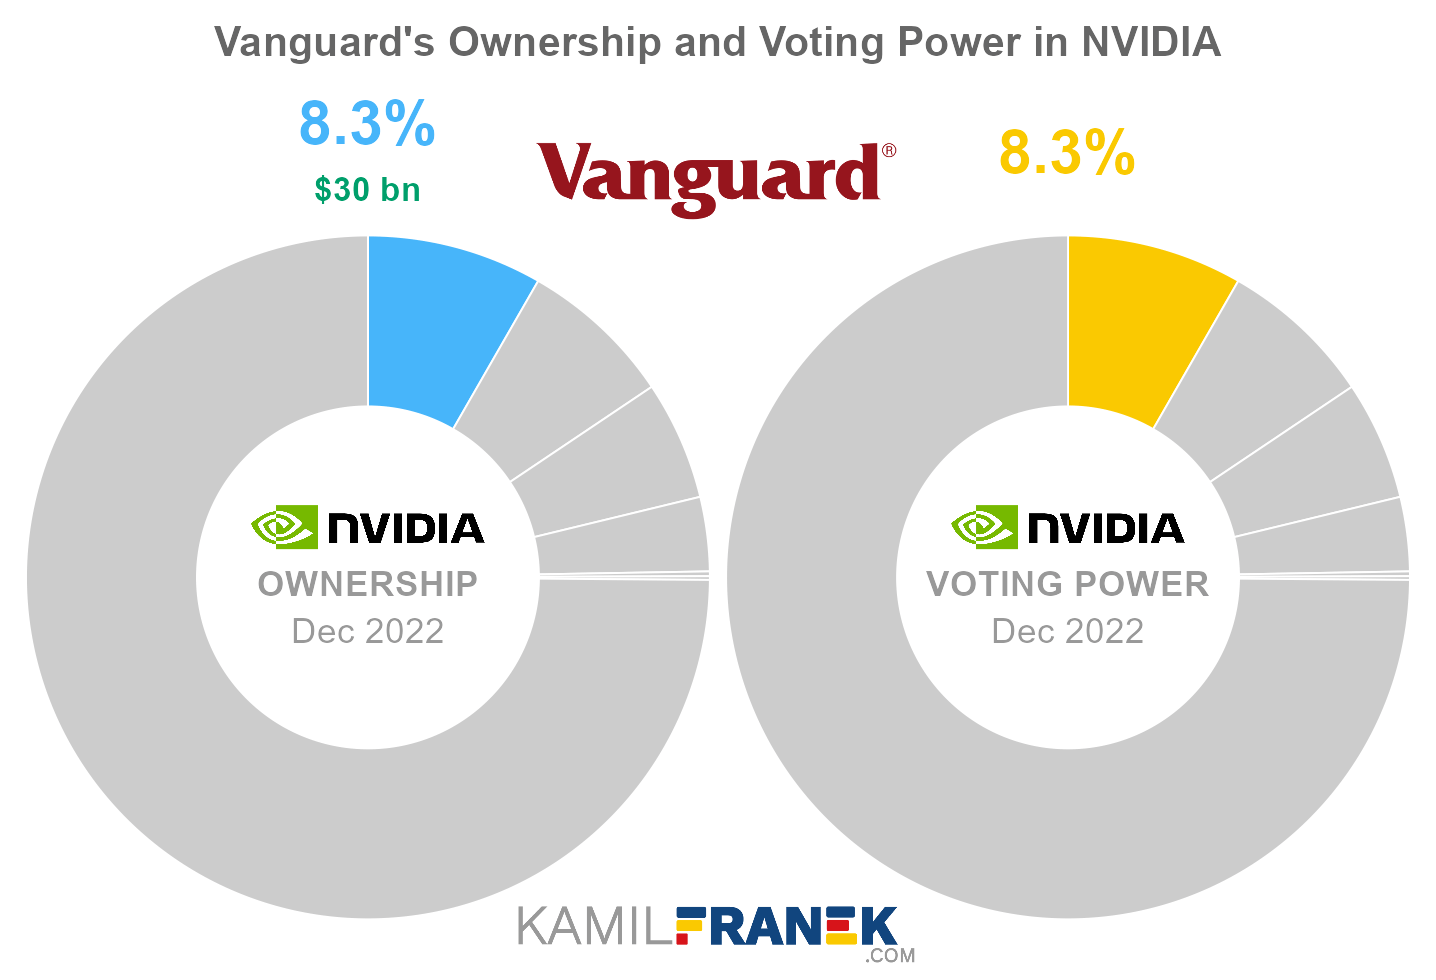 Vanguard's share ownership and voting power in NVIDIA (chart)